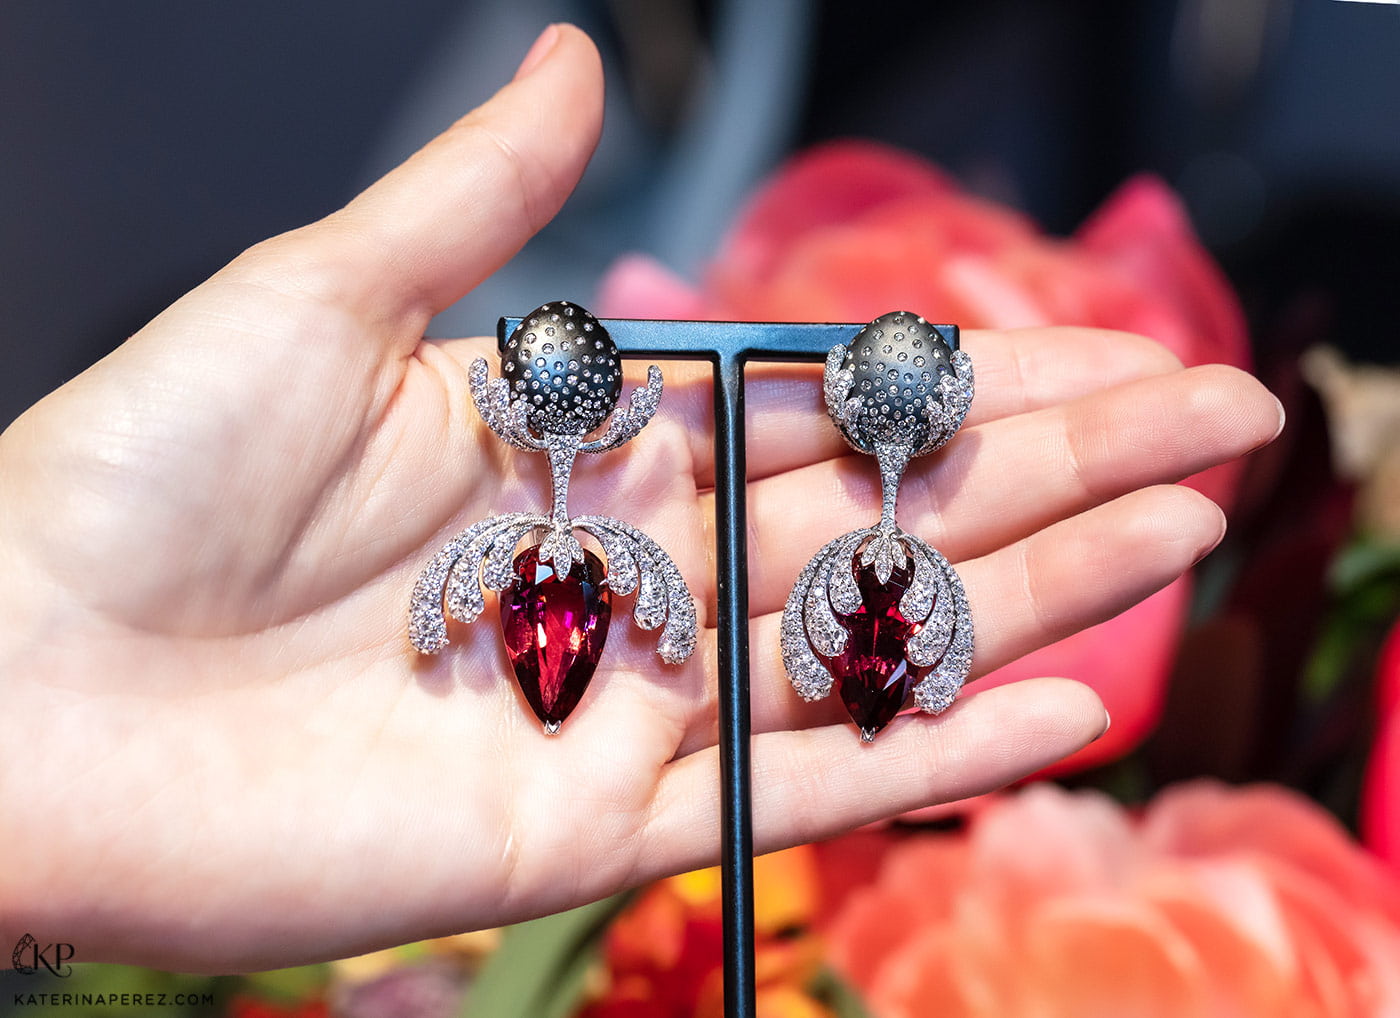 Nicholas Lieou Orchid earrings with tourmalines and diamonds